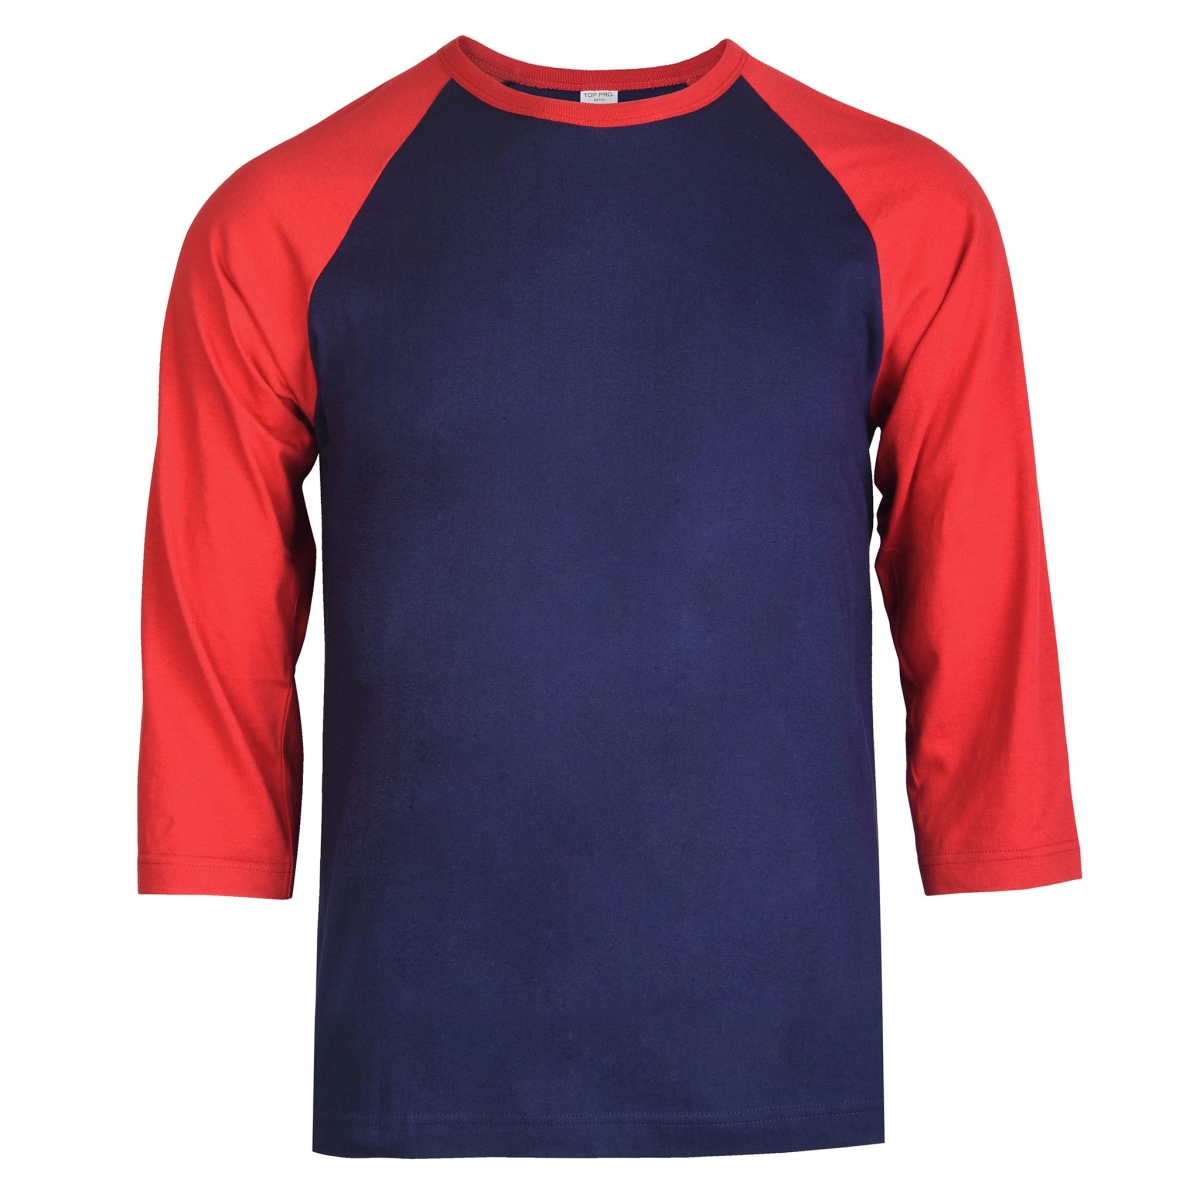 Picture of 247 Frenzy 247-MBT001 DRN-LG Mens Essentials Top Pro 0.75 Sleeve Raglan Baseball T-Shirt&#44; Dark Red & Navy - Large